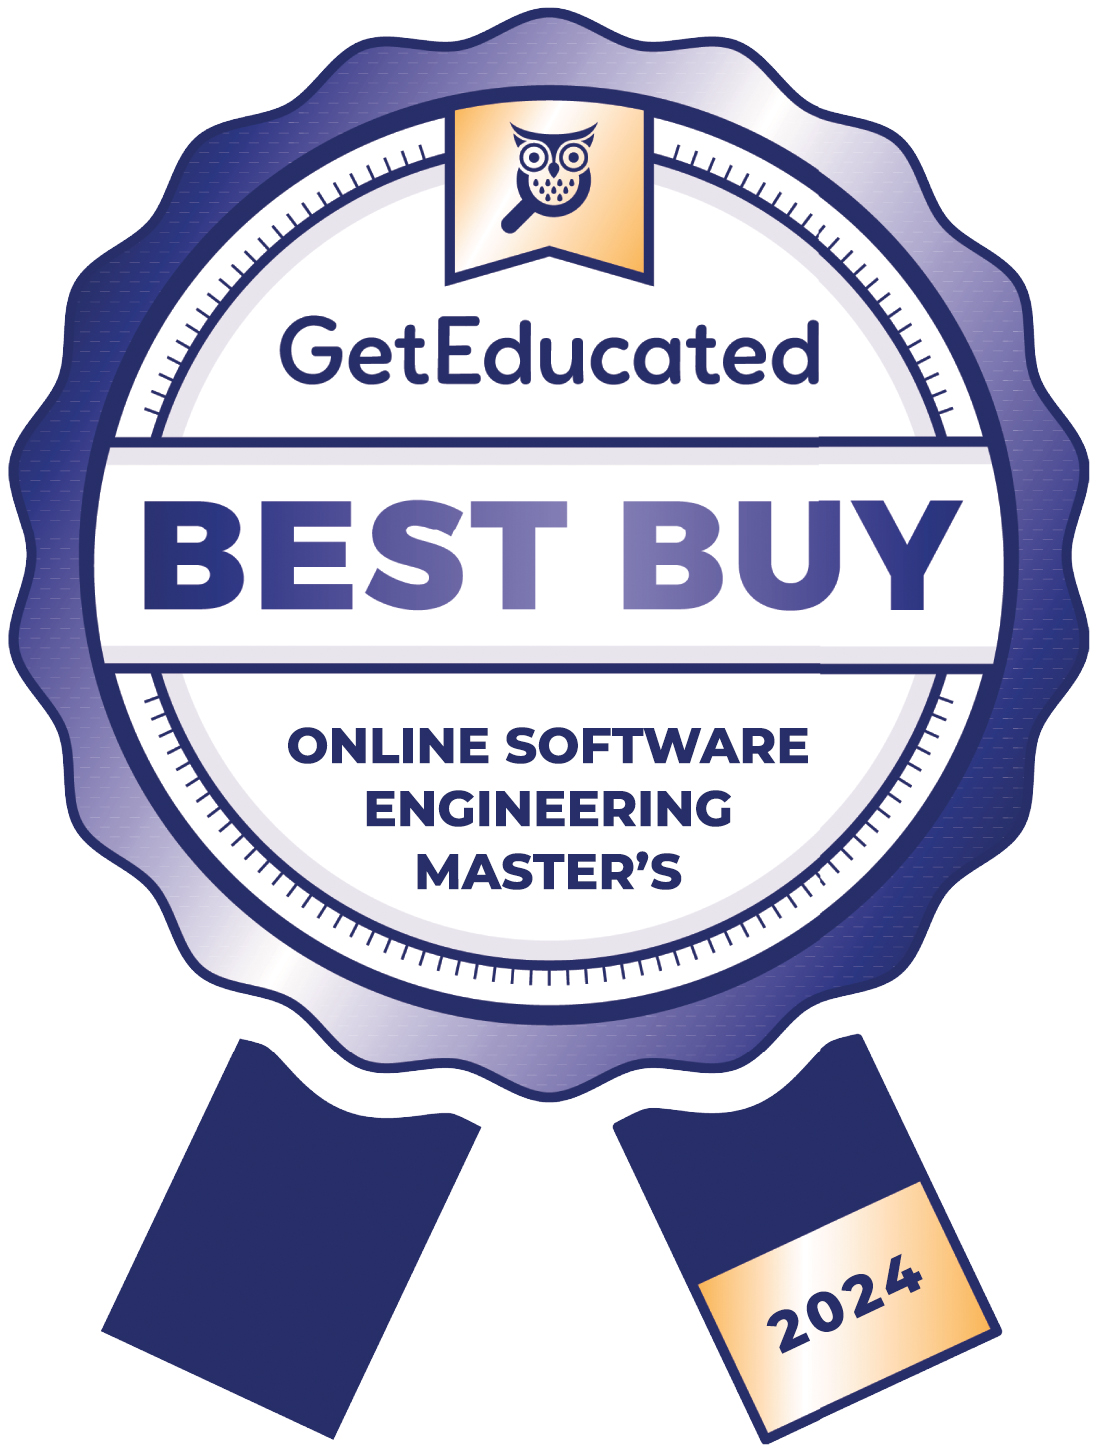 Rankings of the cheapest online software engineering master's programs